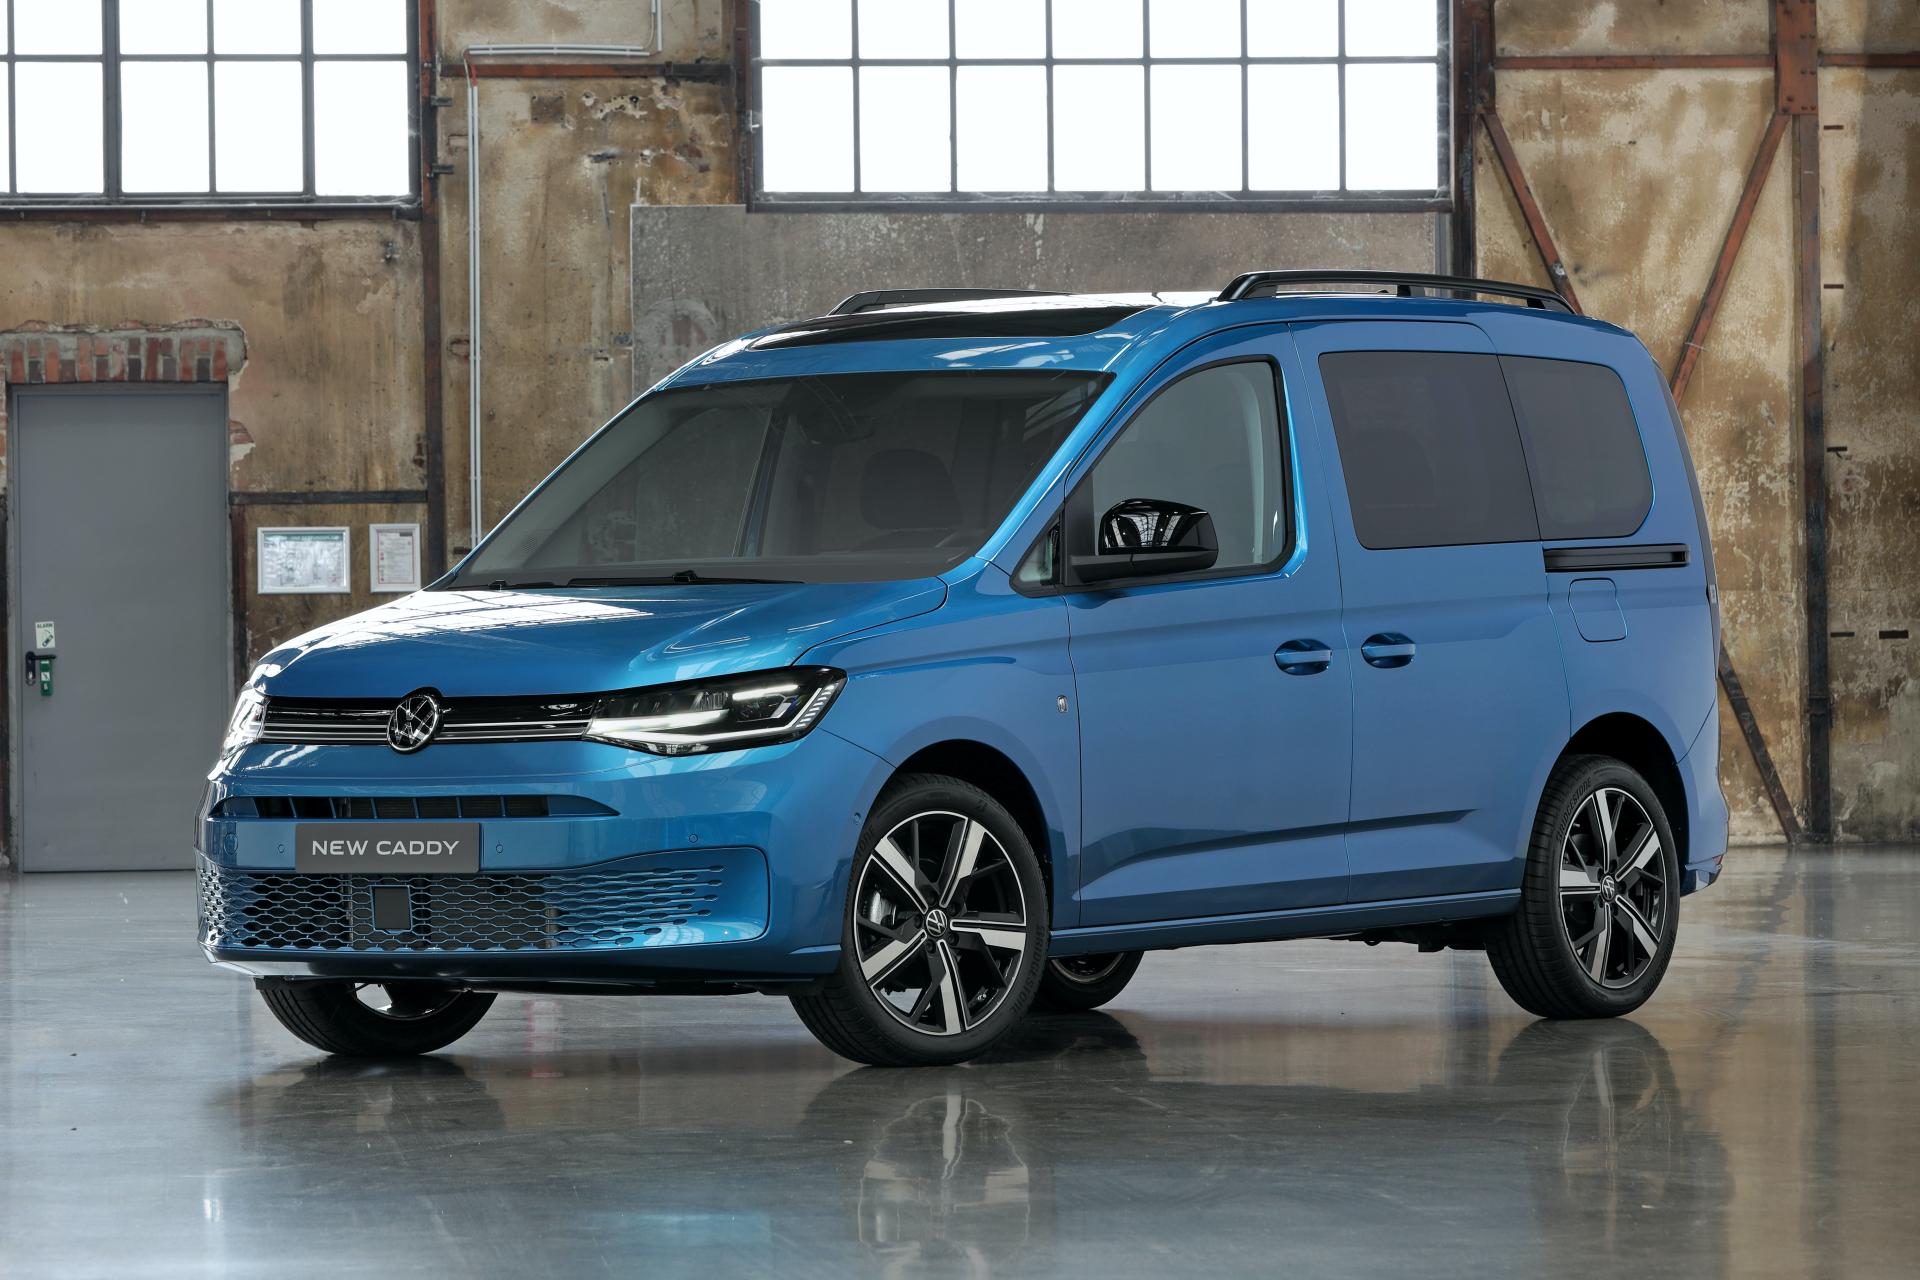 New 2021 VW Caddy Wraps MQB Underpinnings In Evolutionary Styling (60  Photos) | Carscoops